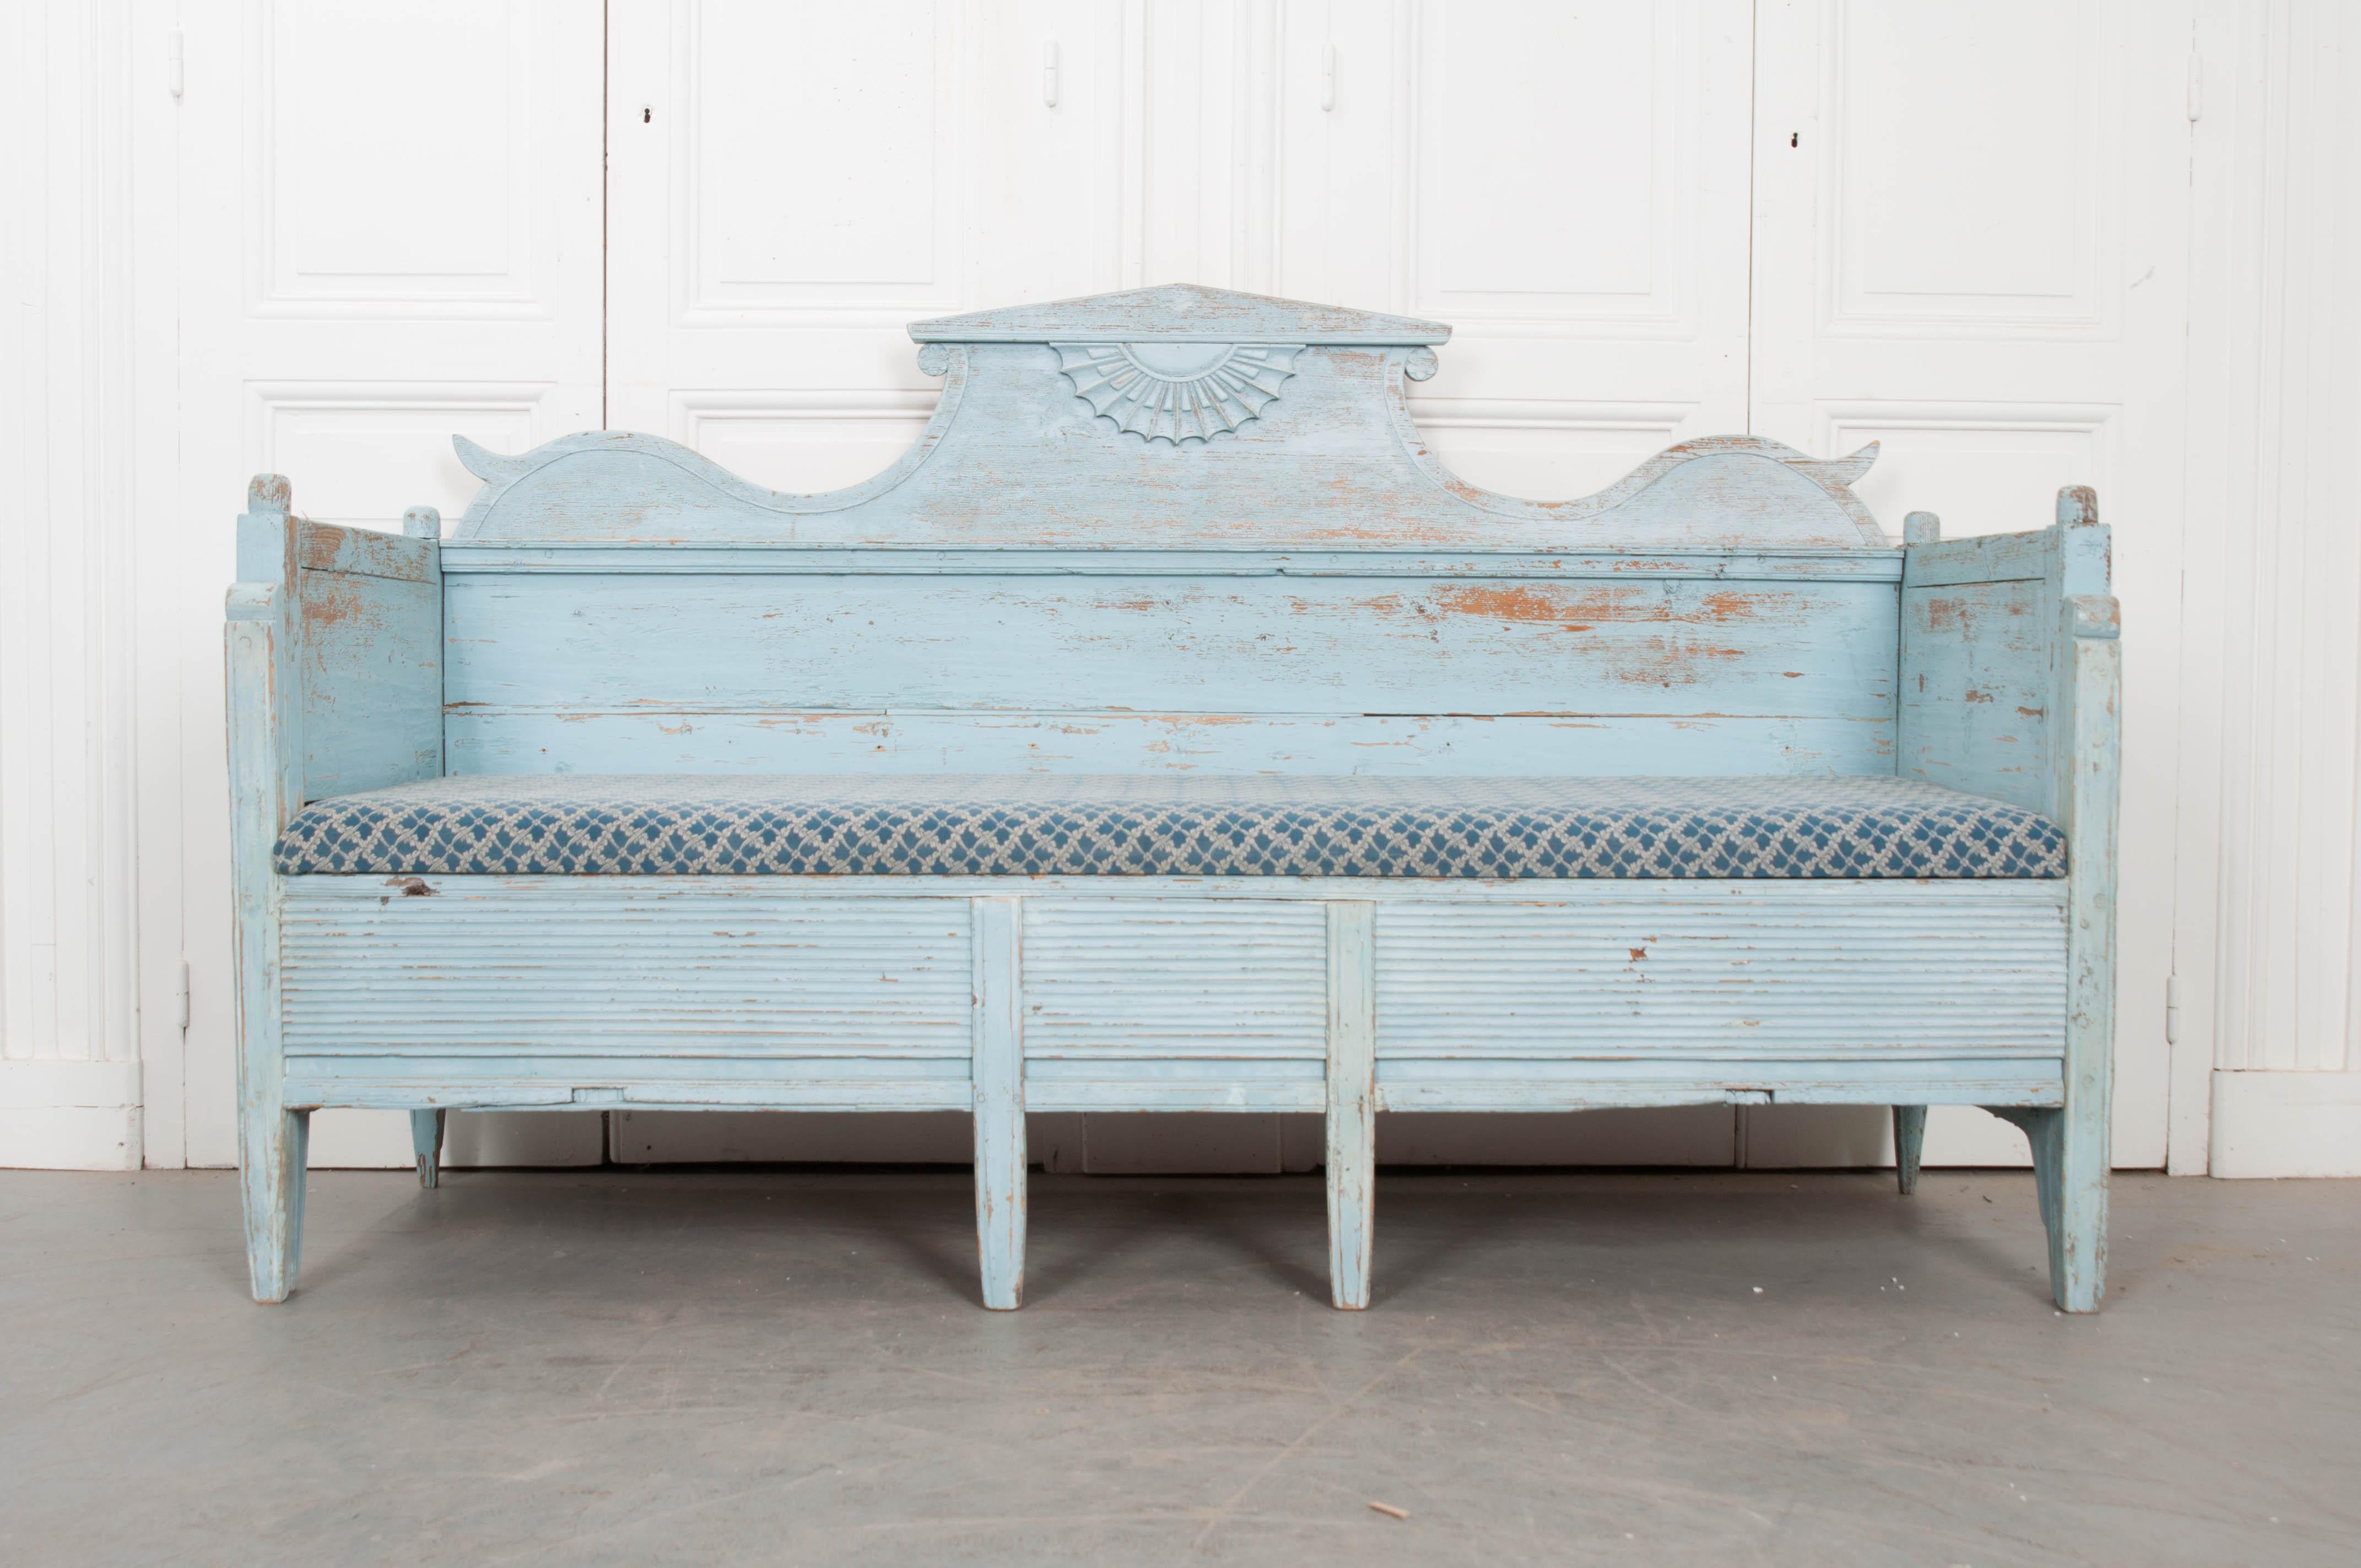 A spectacular powder-blue painted sofa, made in Sweden, circa 1880. The sofa is make of wonderfully carved wood that was painted a light, powder-blue color that has aged marvelously. The seat is upholstered in a patterned blue silk fabric. The back